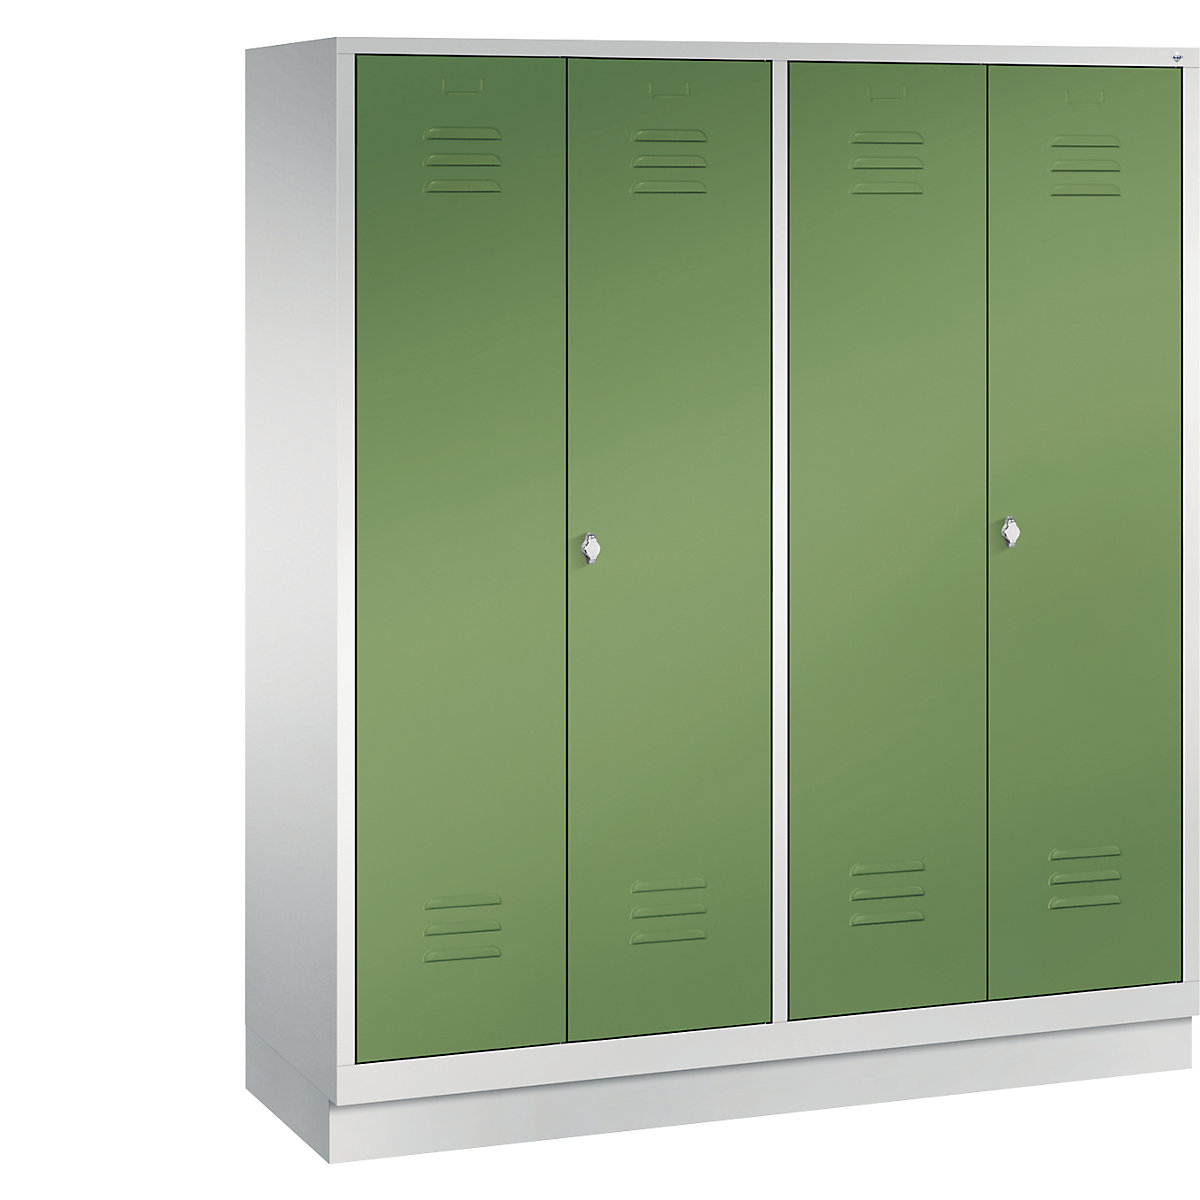 CLASSIC cloakroom locker with plinth, doors close in the middle – C+P, 4 compartments, compartment width 400 mm, light grey / reseda green-14